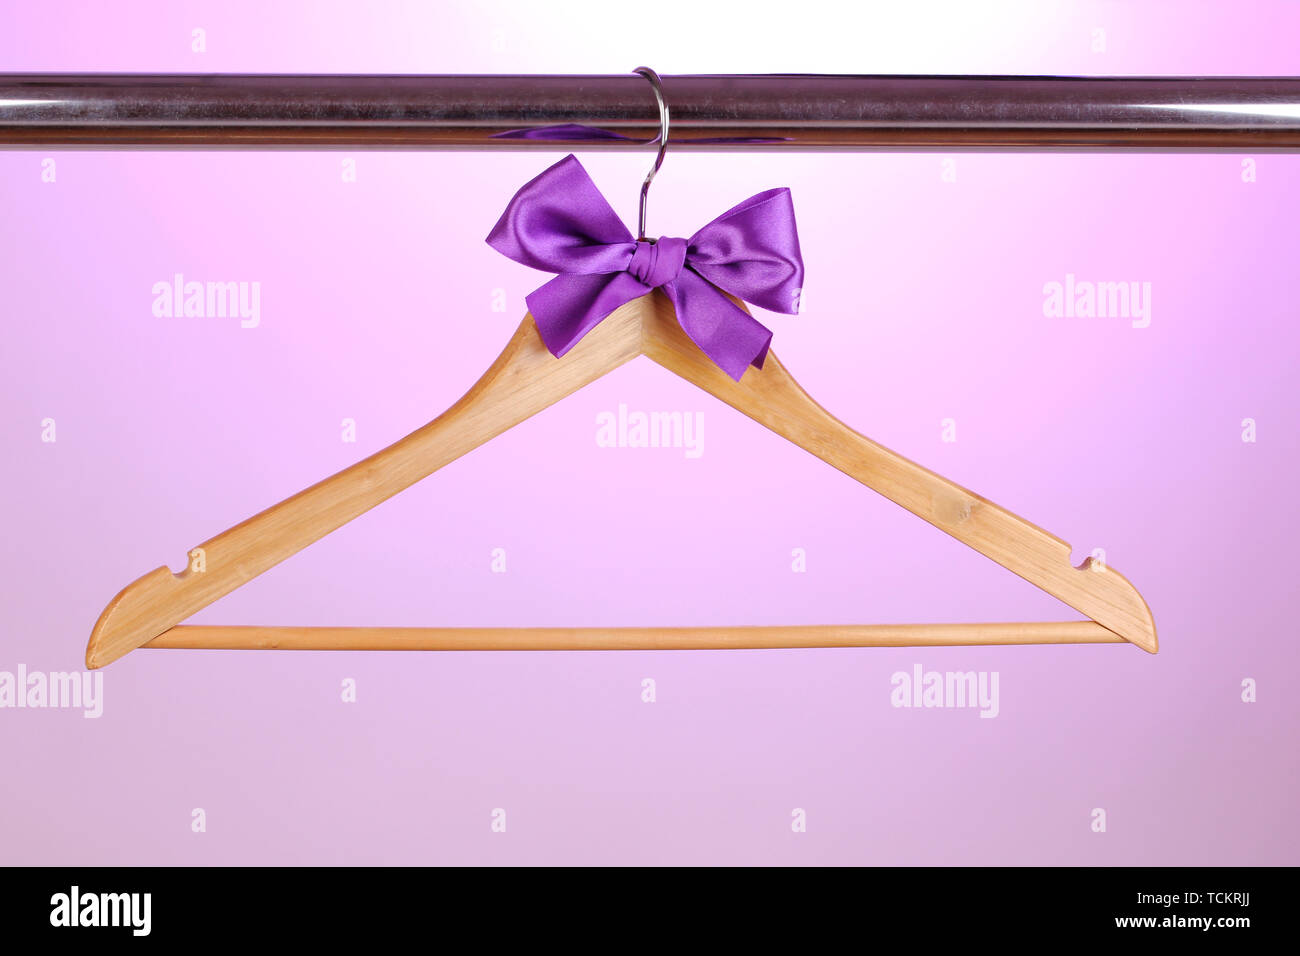 Beautiful purple bow hanging on wooden hanger on purple background Stock Photo